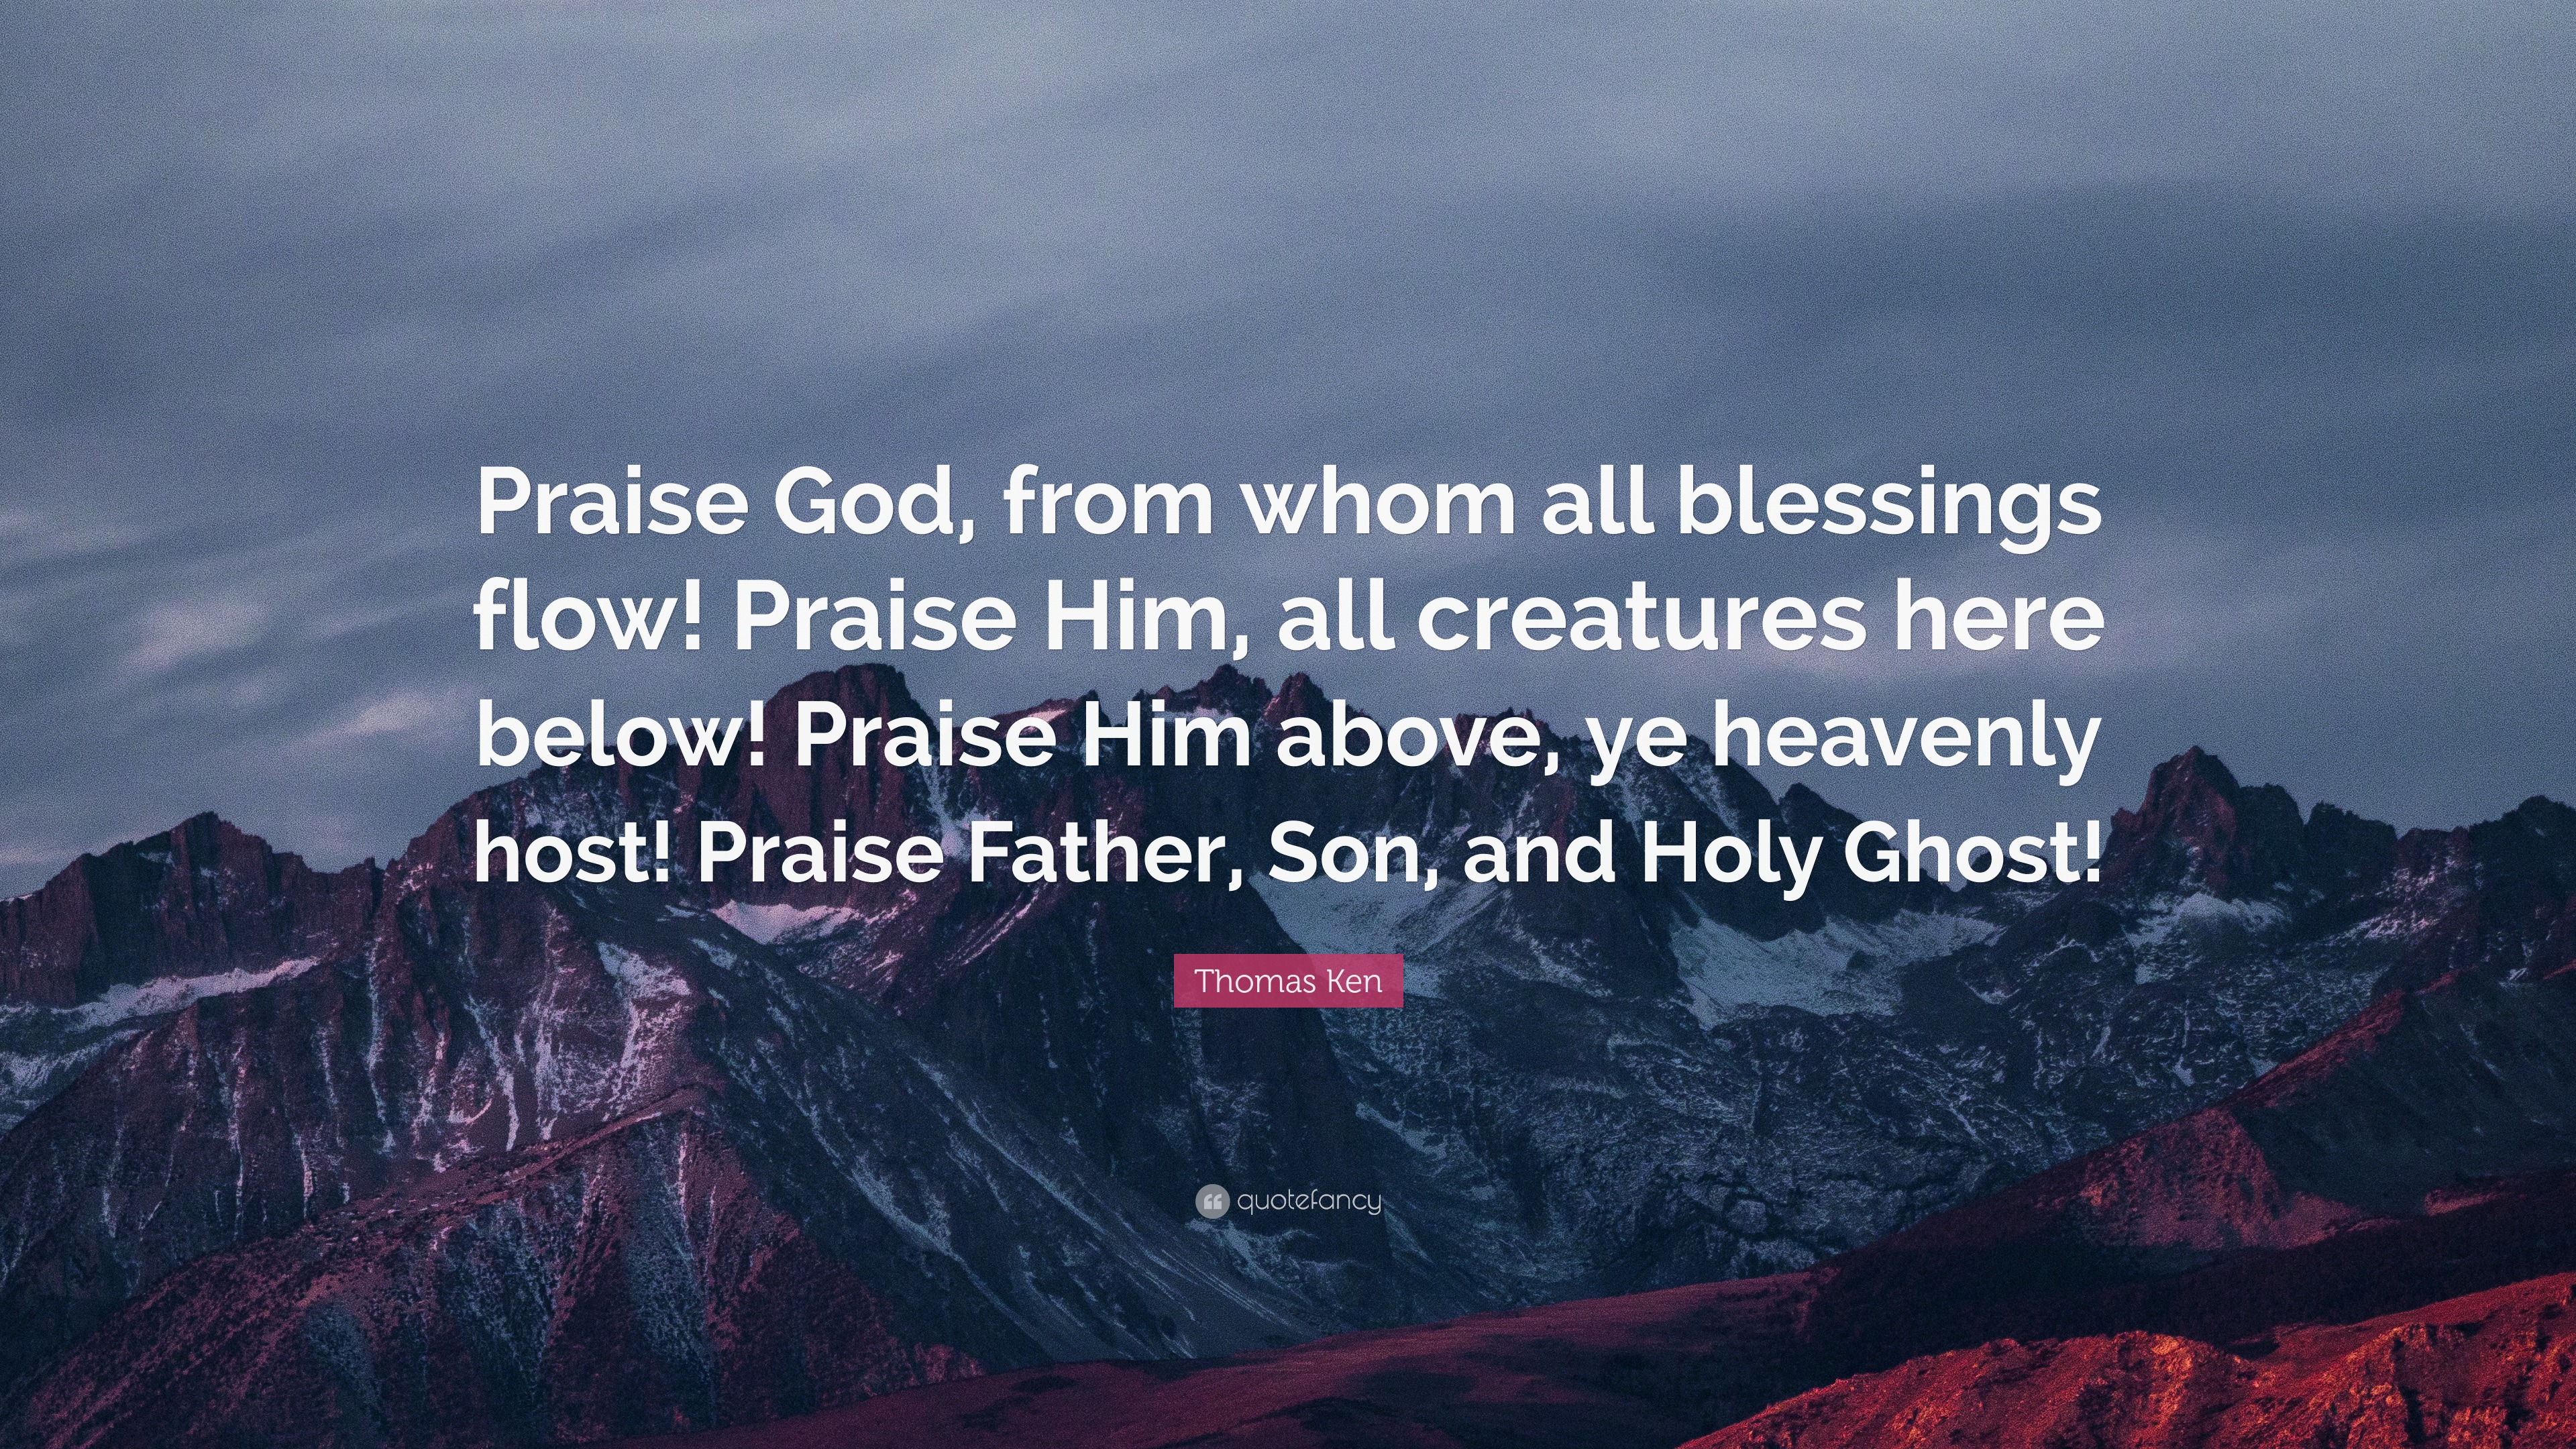 Thomas Ken Quote: “Praise God, from whom all blessings flow! Praise Him ...